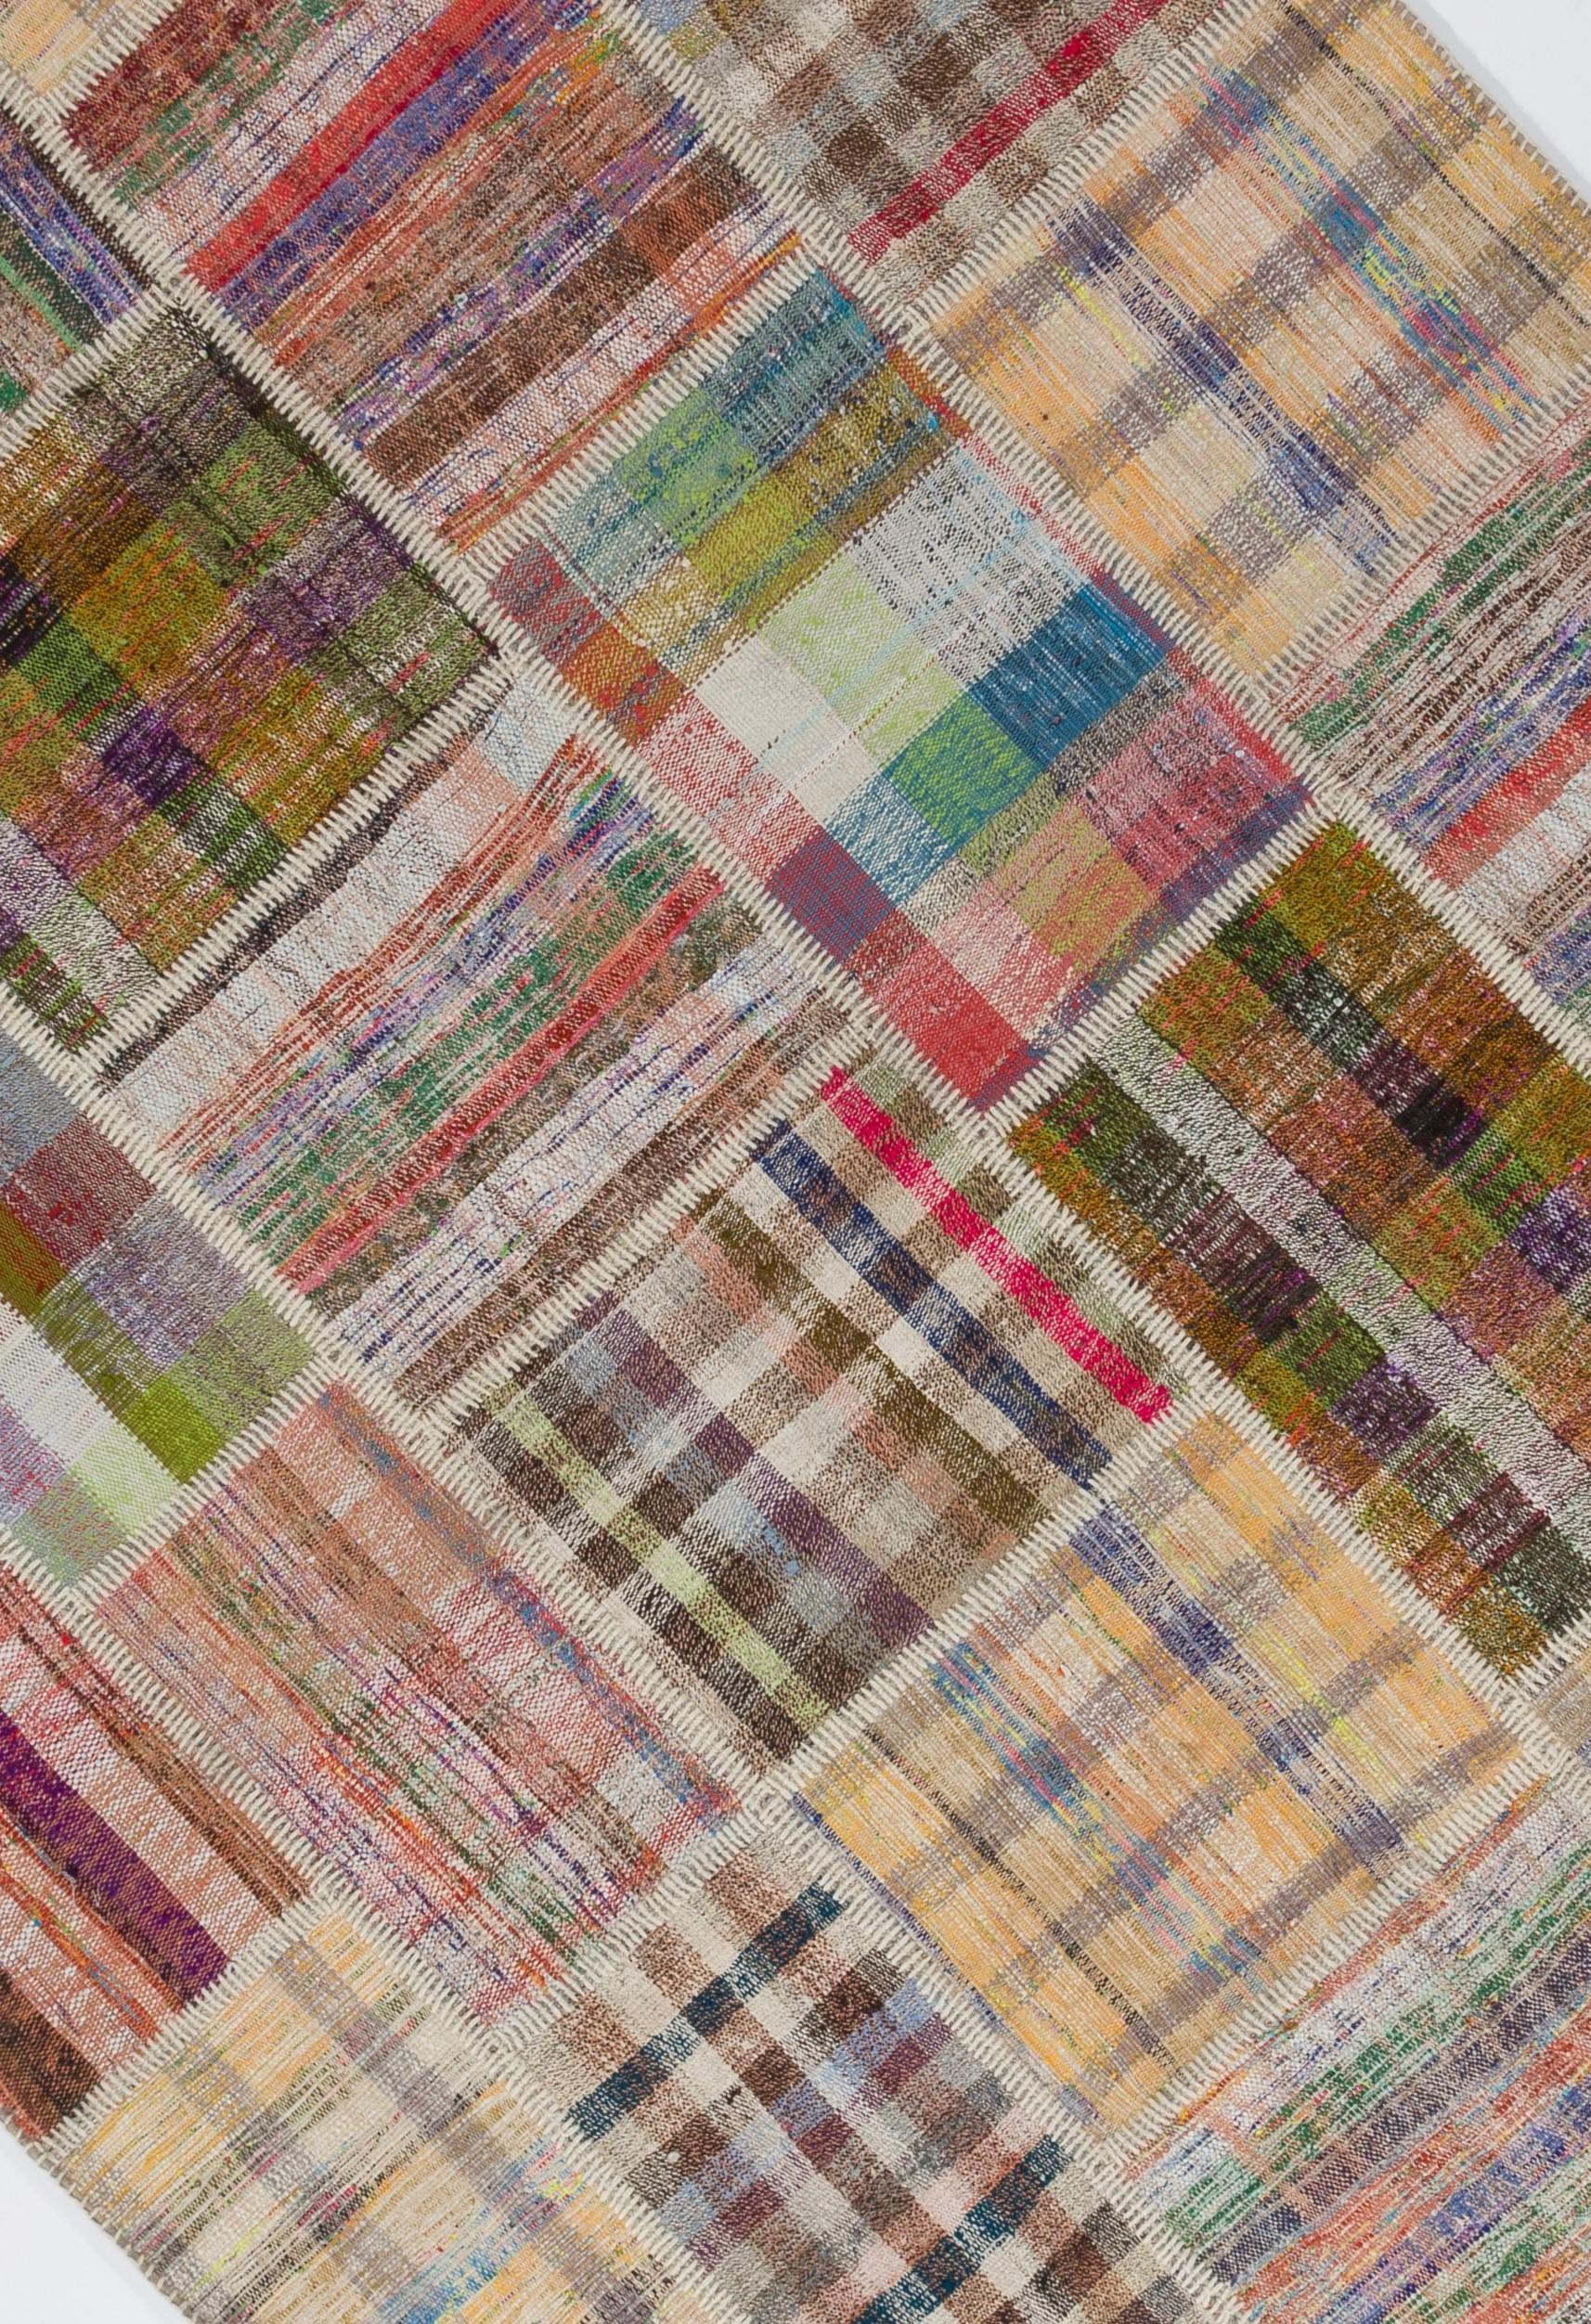 A fun floor covering made of pieces of assorted vintage handmade Anatolian kilims (flat-weaves) in cheerful rainbow colors featuring various checkered patterns.

The Kilim is made of wool, cotton and goat hair. The patches are individually hand